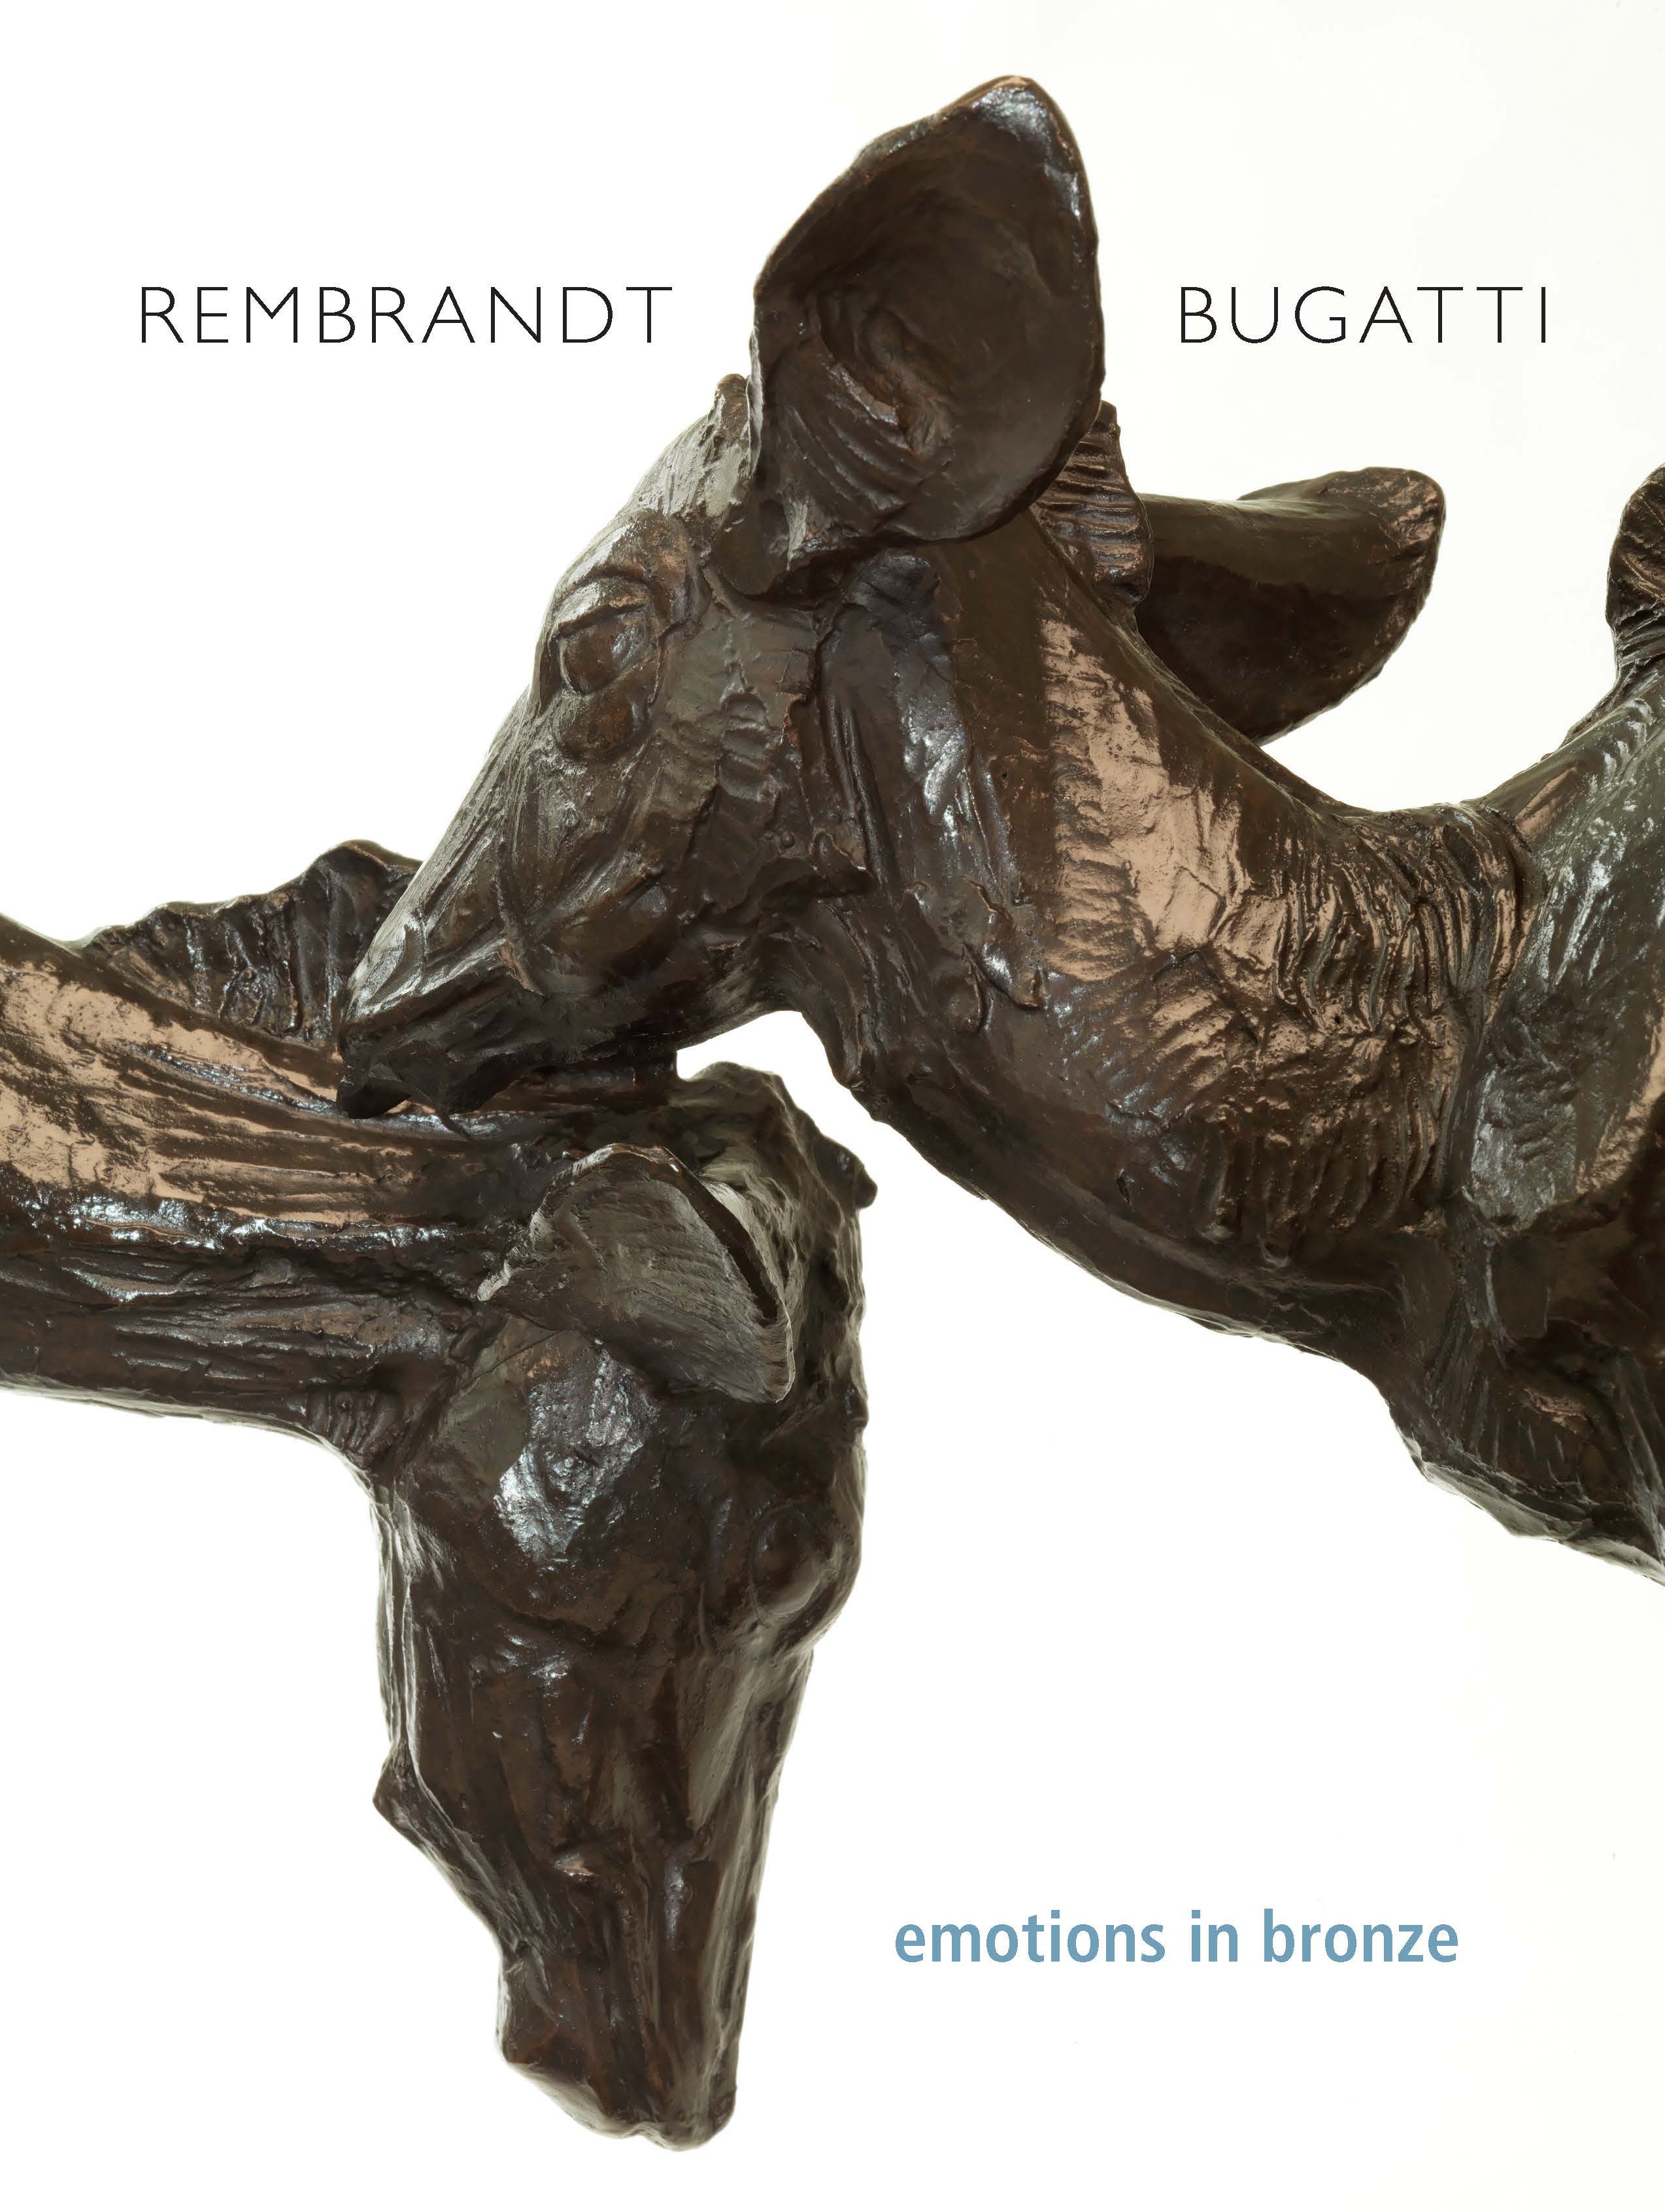 Rembrandt Bugatti – Emotions in Bronze by Edward Horswell